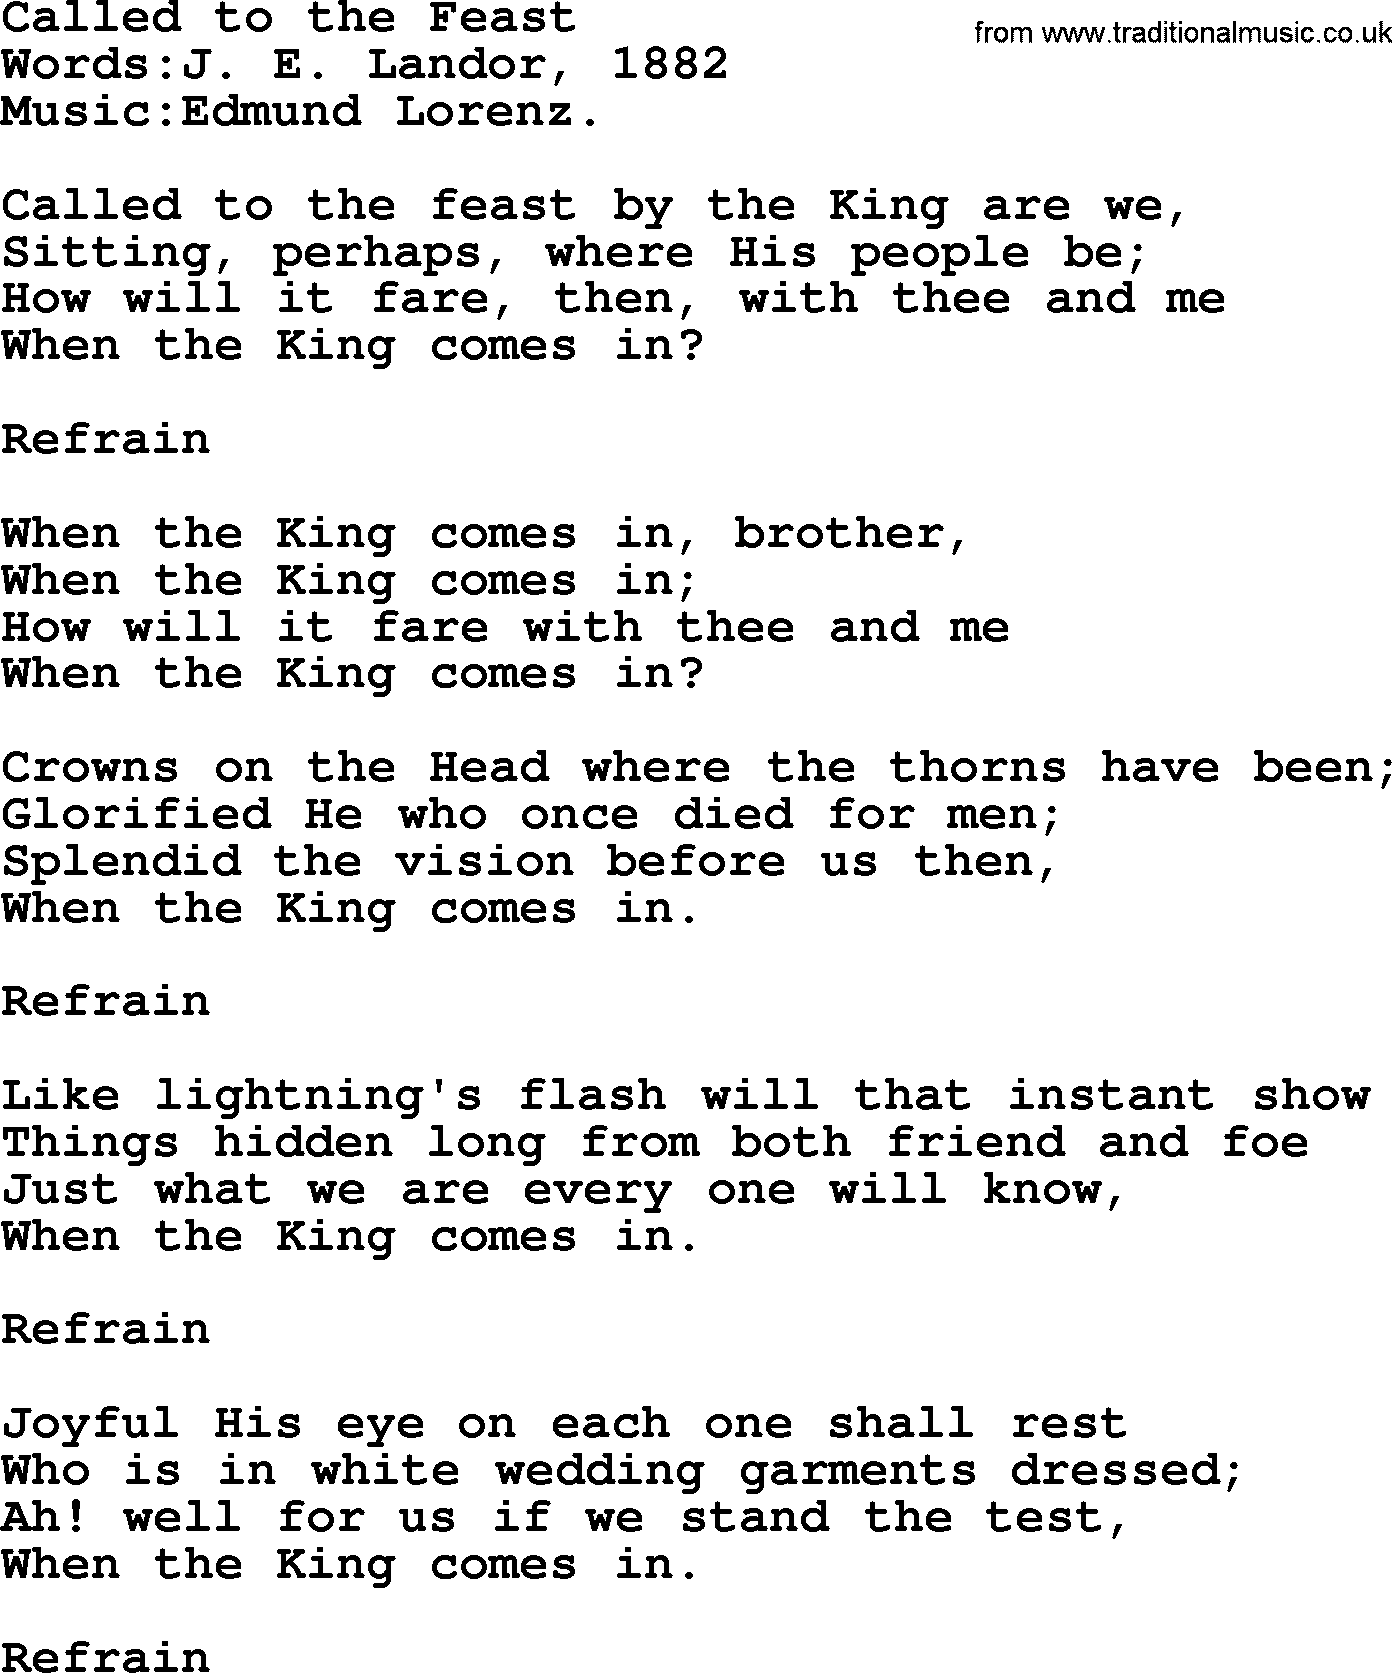 Christian hymns and songs about Jesus' Return(The Second Coming): Called To The Feast, lyrics with PDF